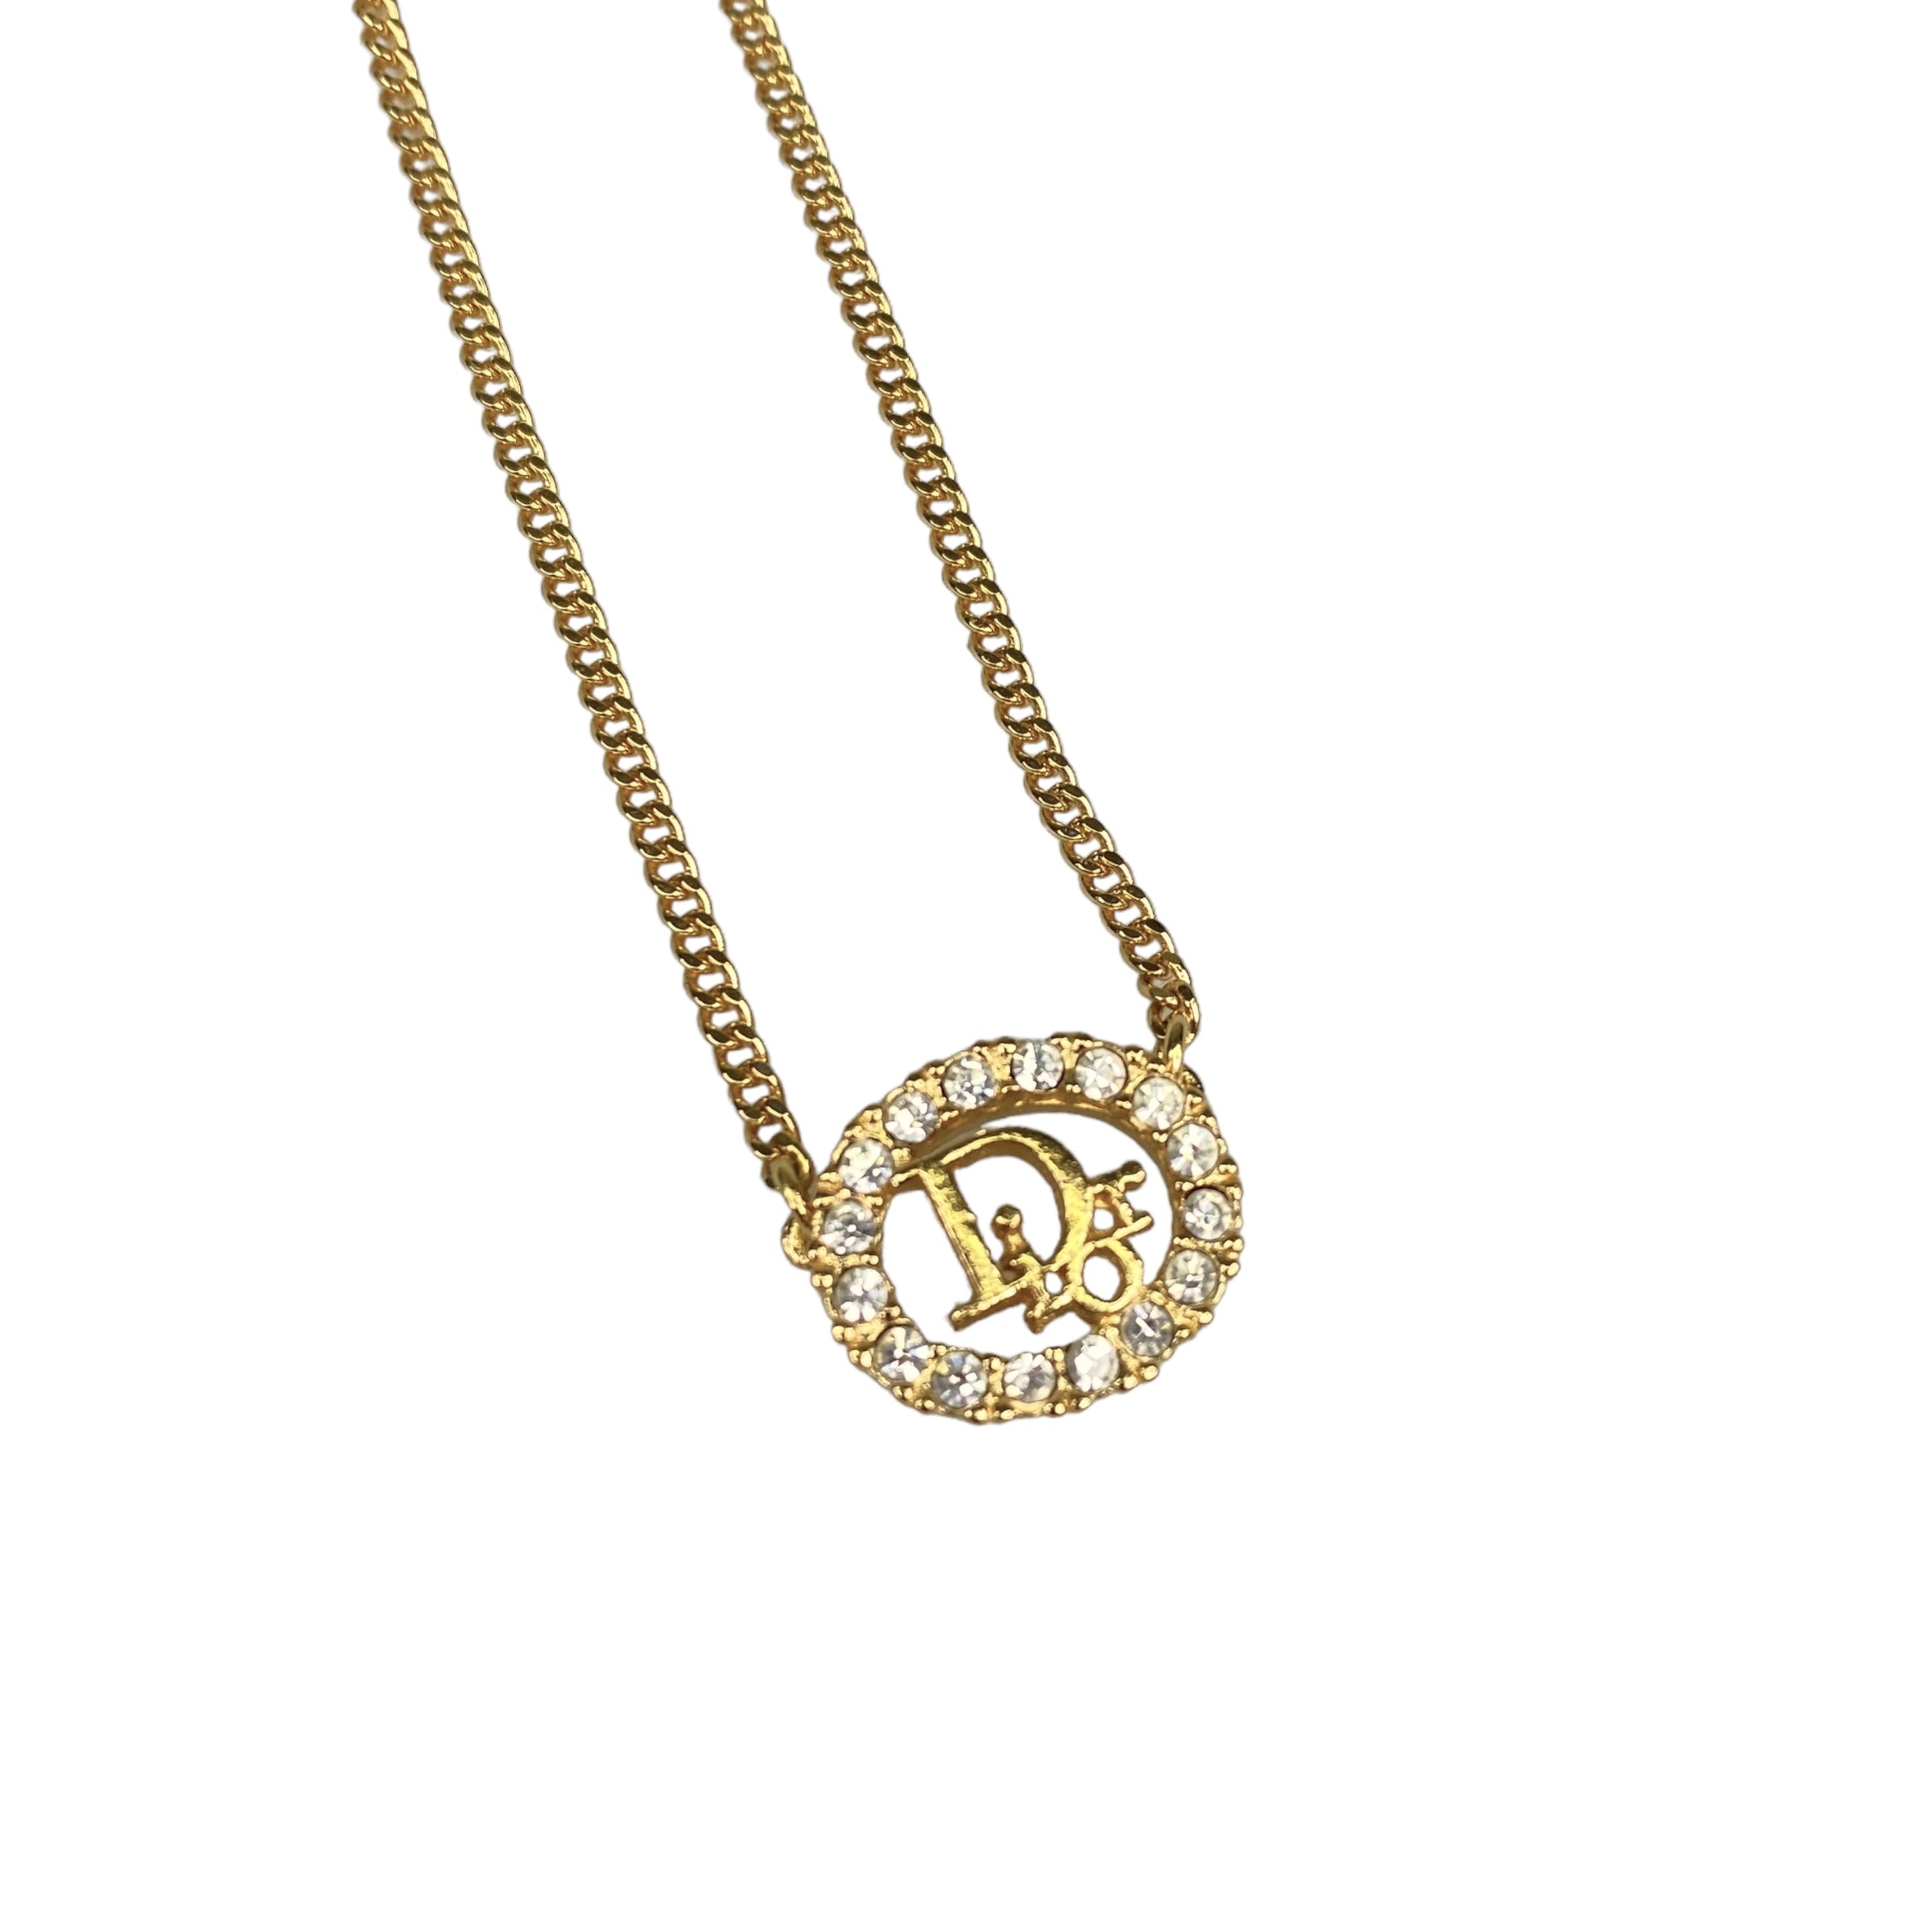 DIOR RHINESTONE ENCRUSTED OVAL OBLIQUE PENDANT NECKLACE GOLD PLATED